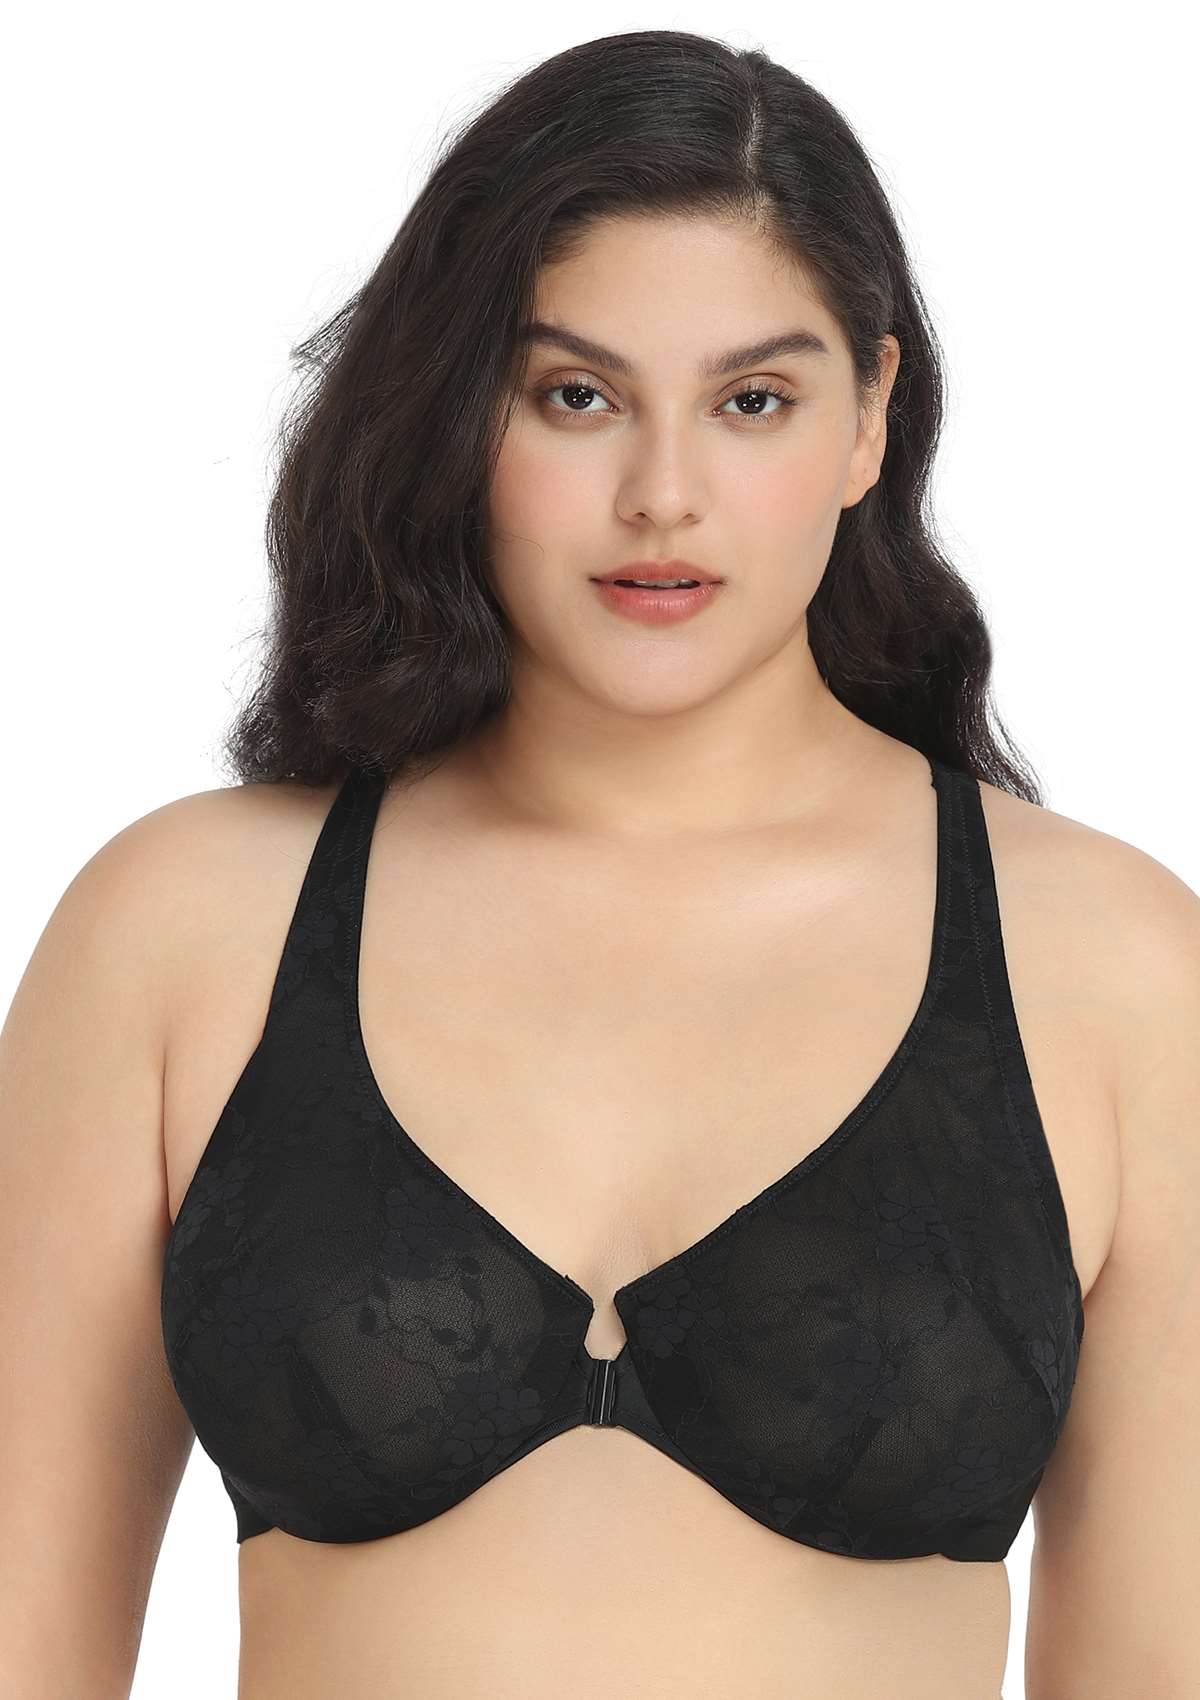 HSIA Spring Romance Front-Close Floral Lace Unlined Full Coverage Bra - Black / 36 / I